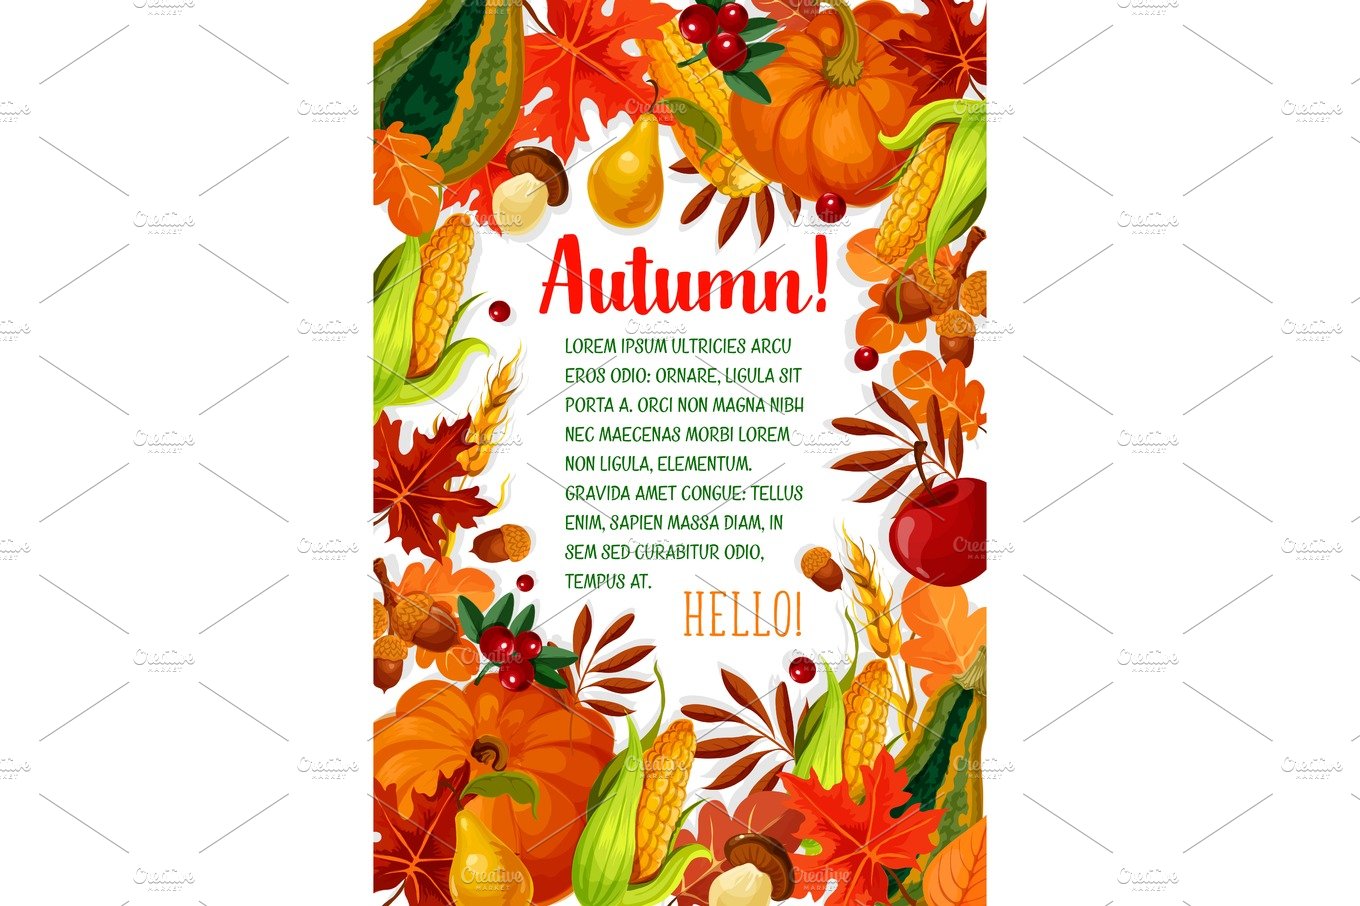 Hello Autumn poster with fall season leaf frame cover image.